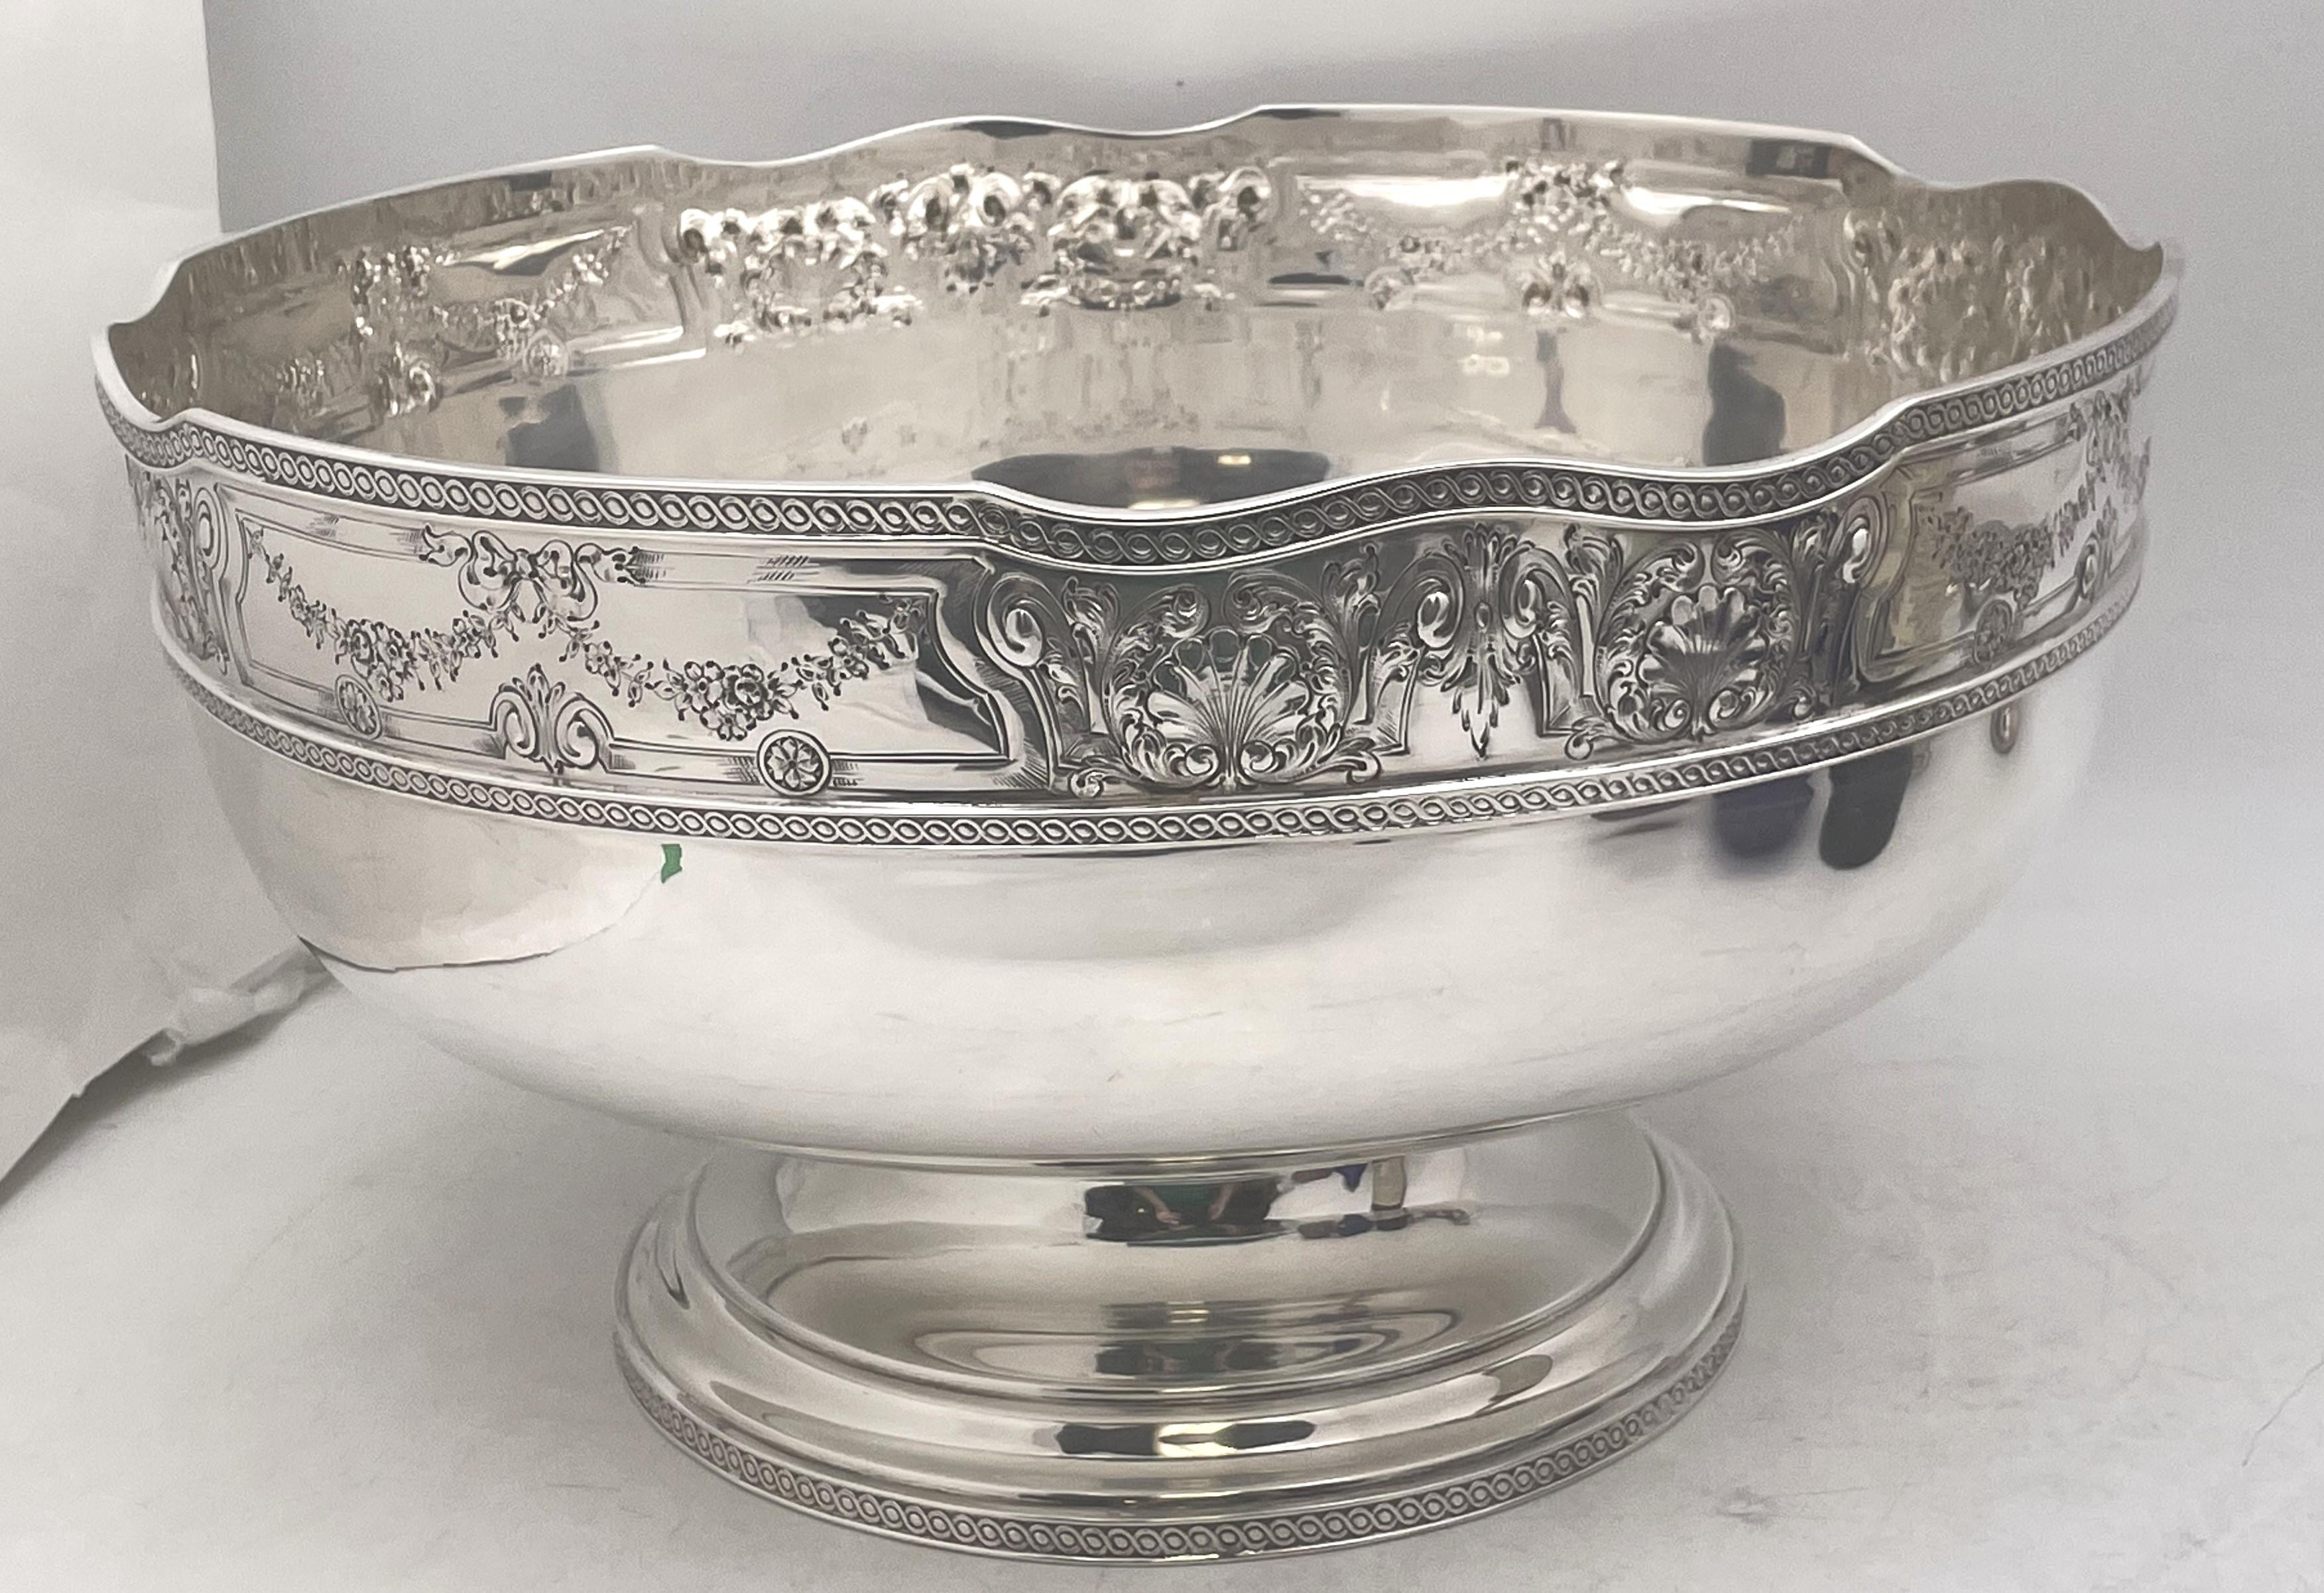 Barbour sterling silver impressive wine chiller or centerpiece punch bowl, beautifully adorned with shell and natural motifs, displaying geometric frieze-like motifs at the top and at the base. It measures 14'' in diameter by 8'' in height, weighs